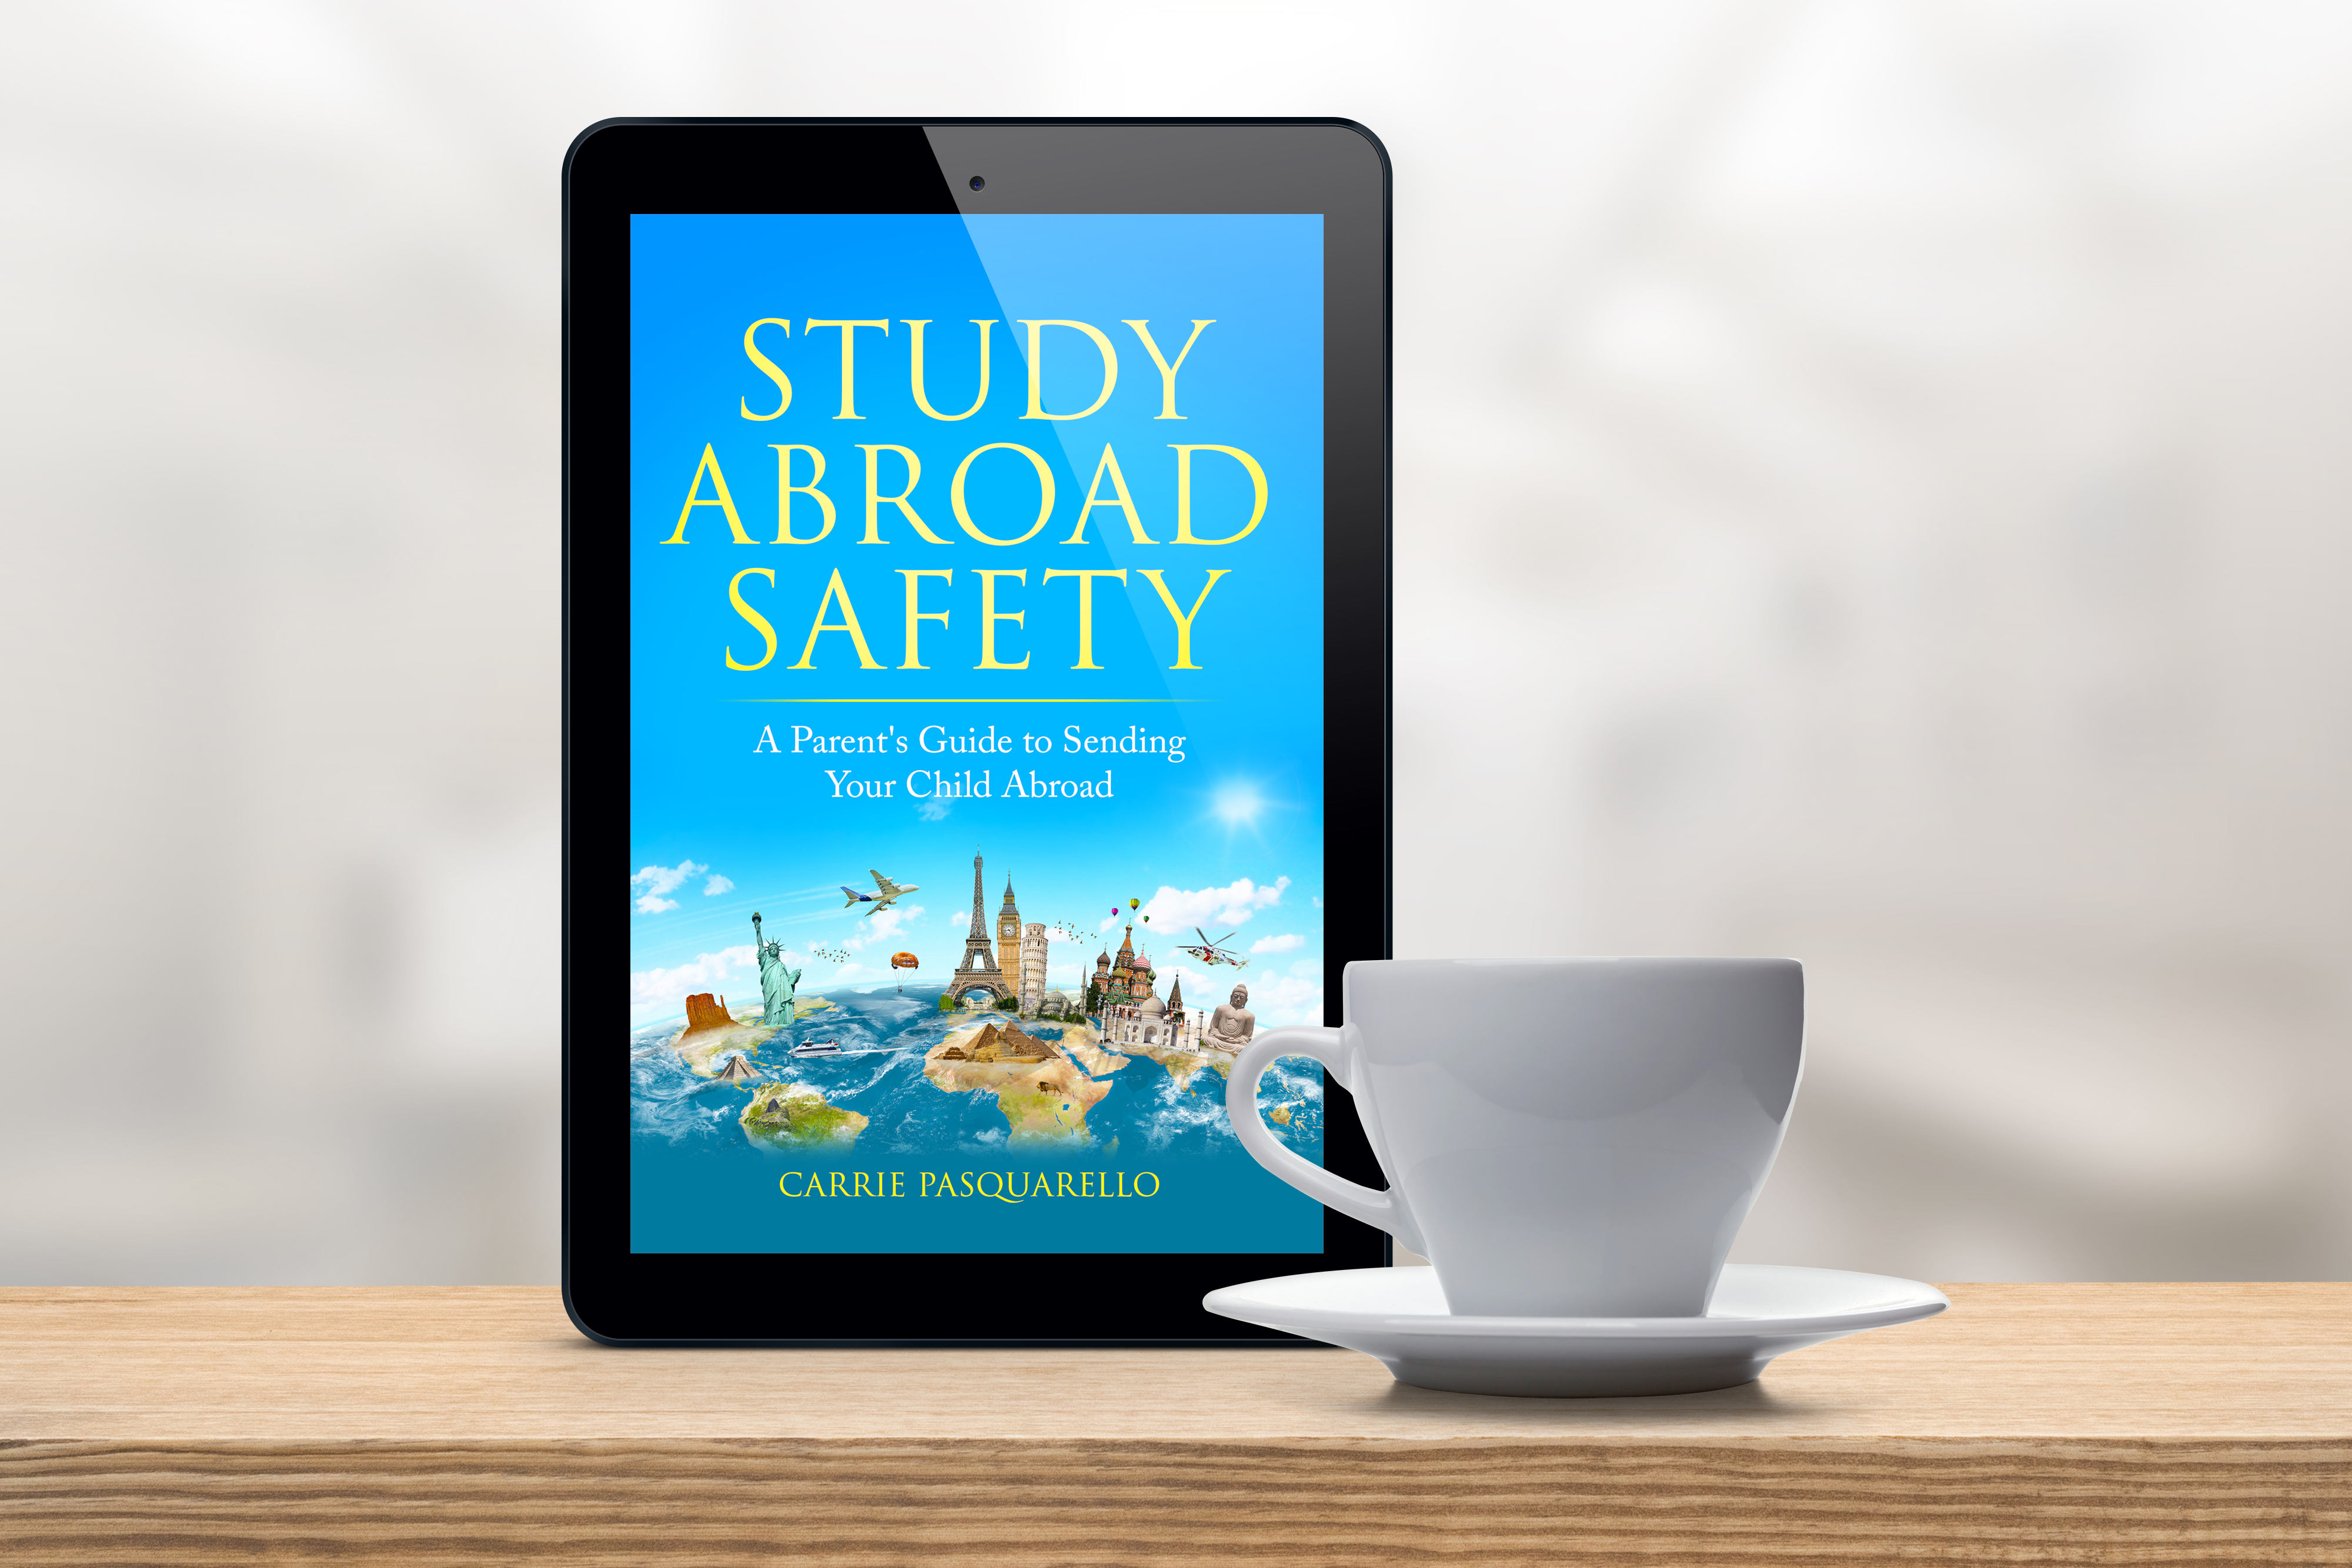 New Book and eBook Launch: Study Abroad Safety, A Parent’s Guide to Sending Their Child Abroad